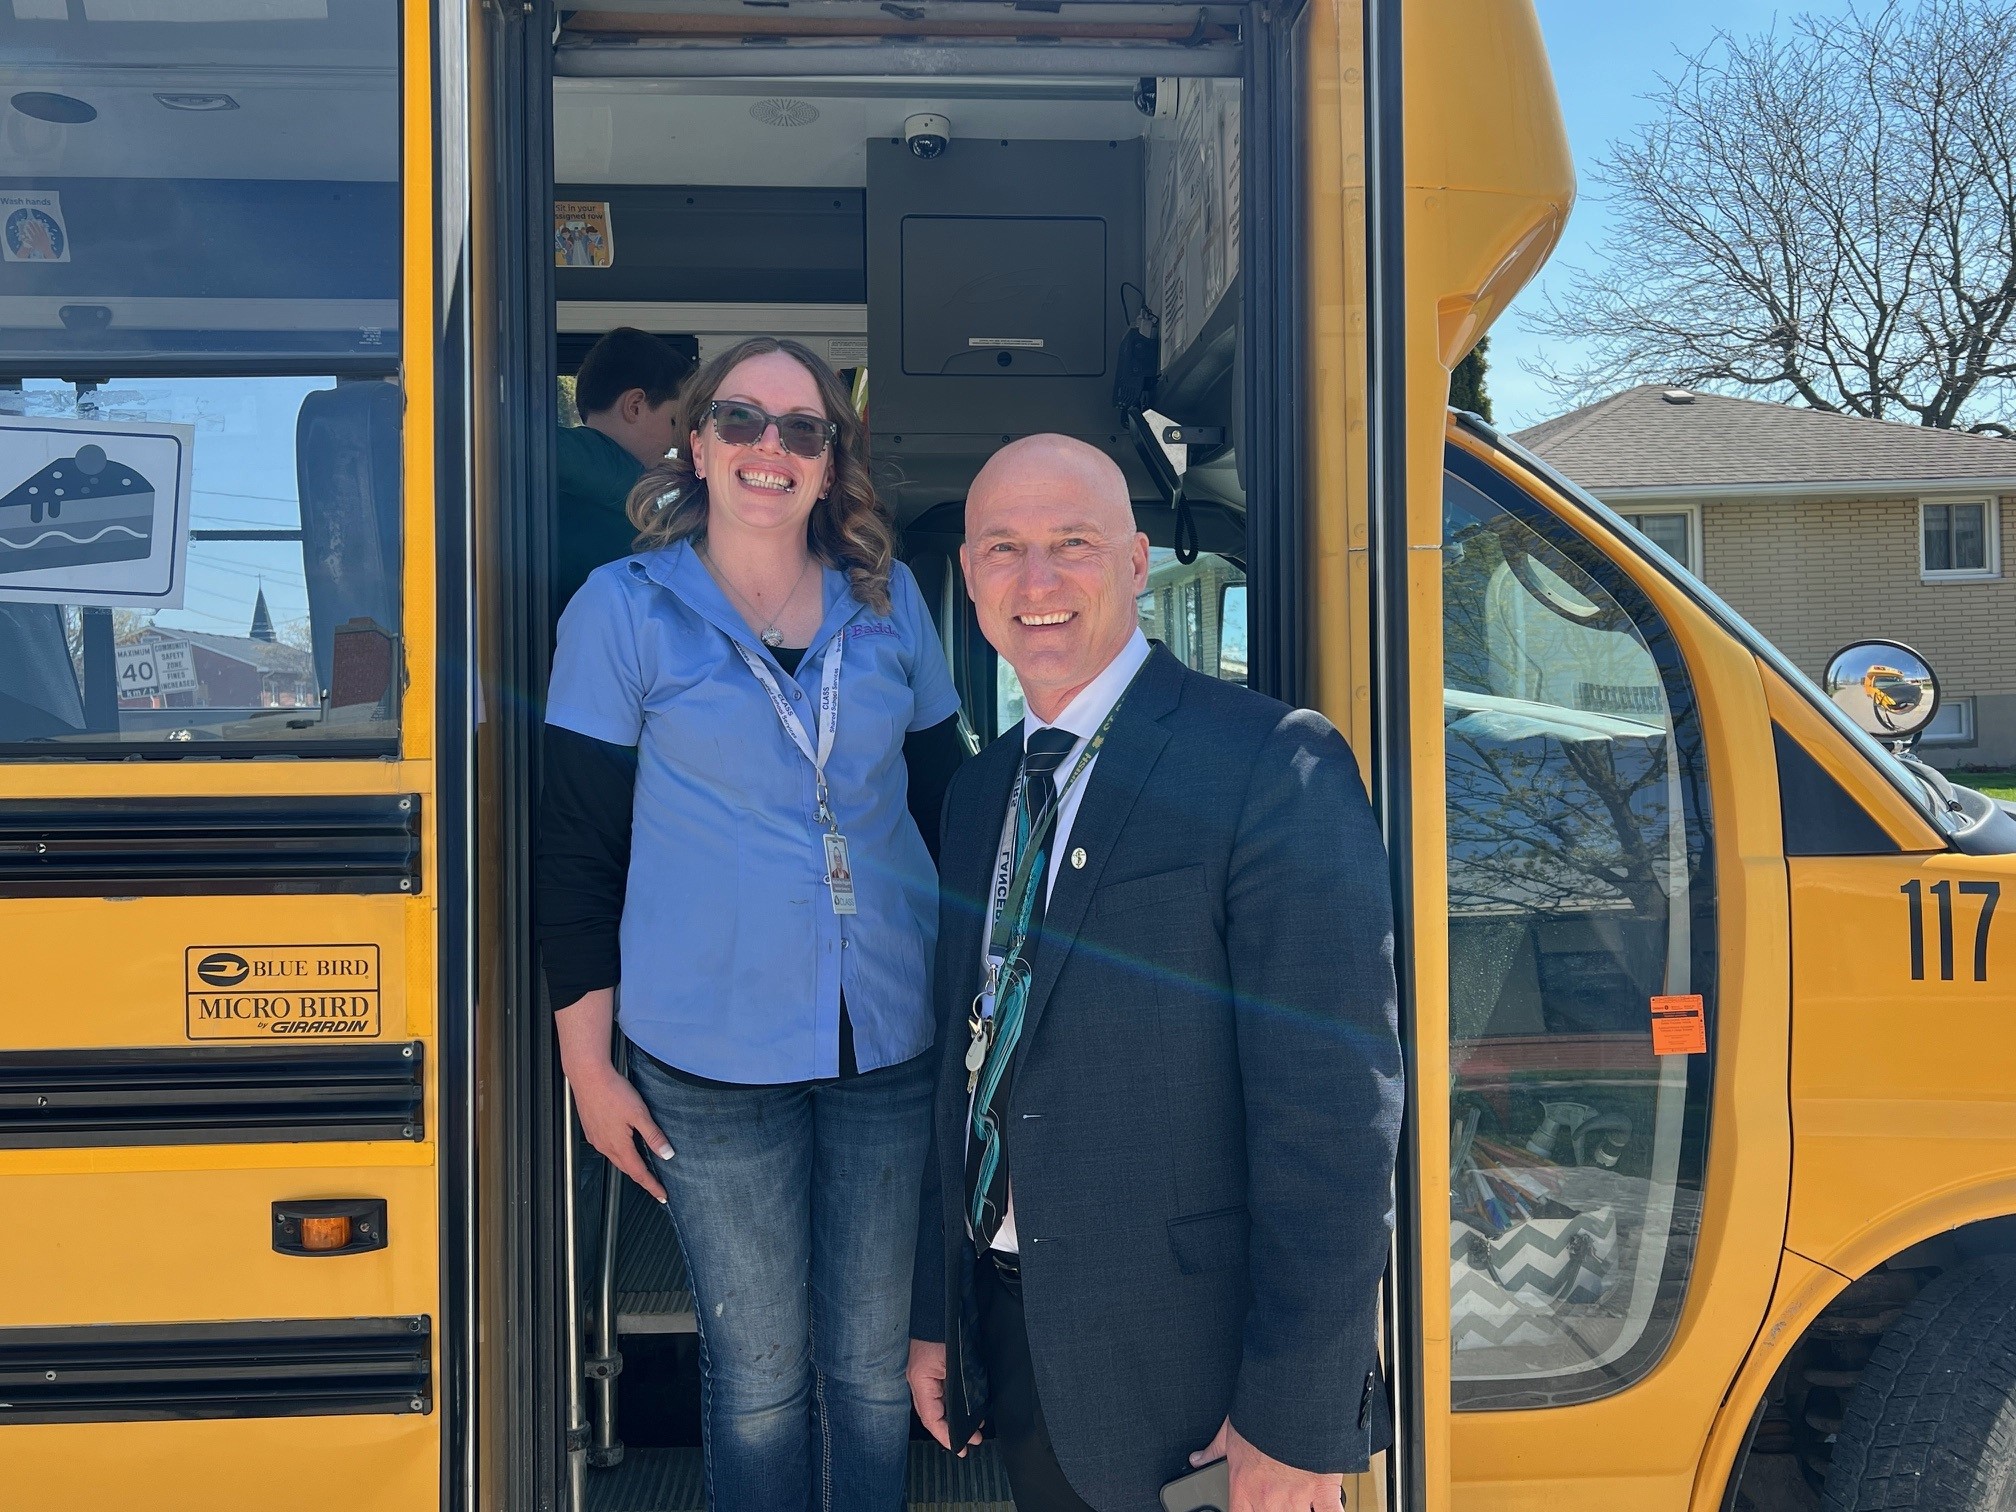 Winner of Bus Driver Appreciation Award Continues to Go the Extra Mile